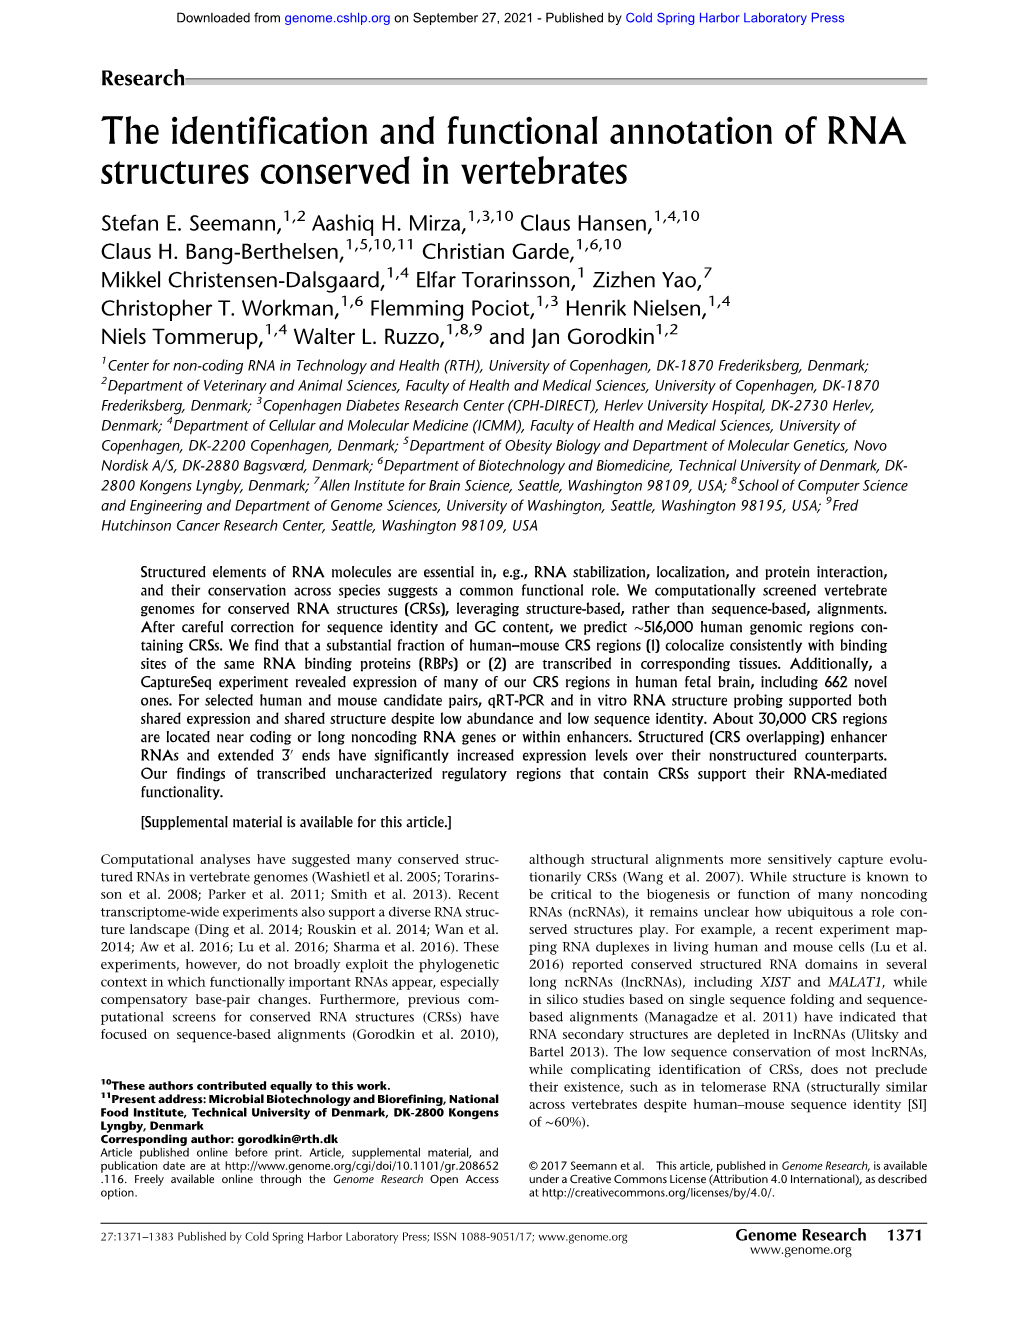 The Identification and Functional Annotation of RNA Structures Conserved in Vertebrates